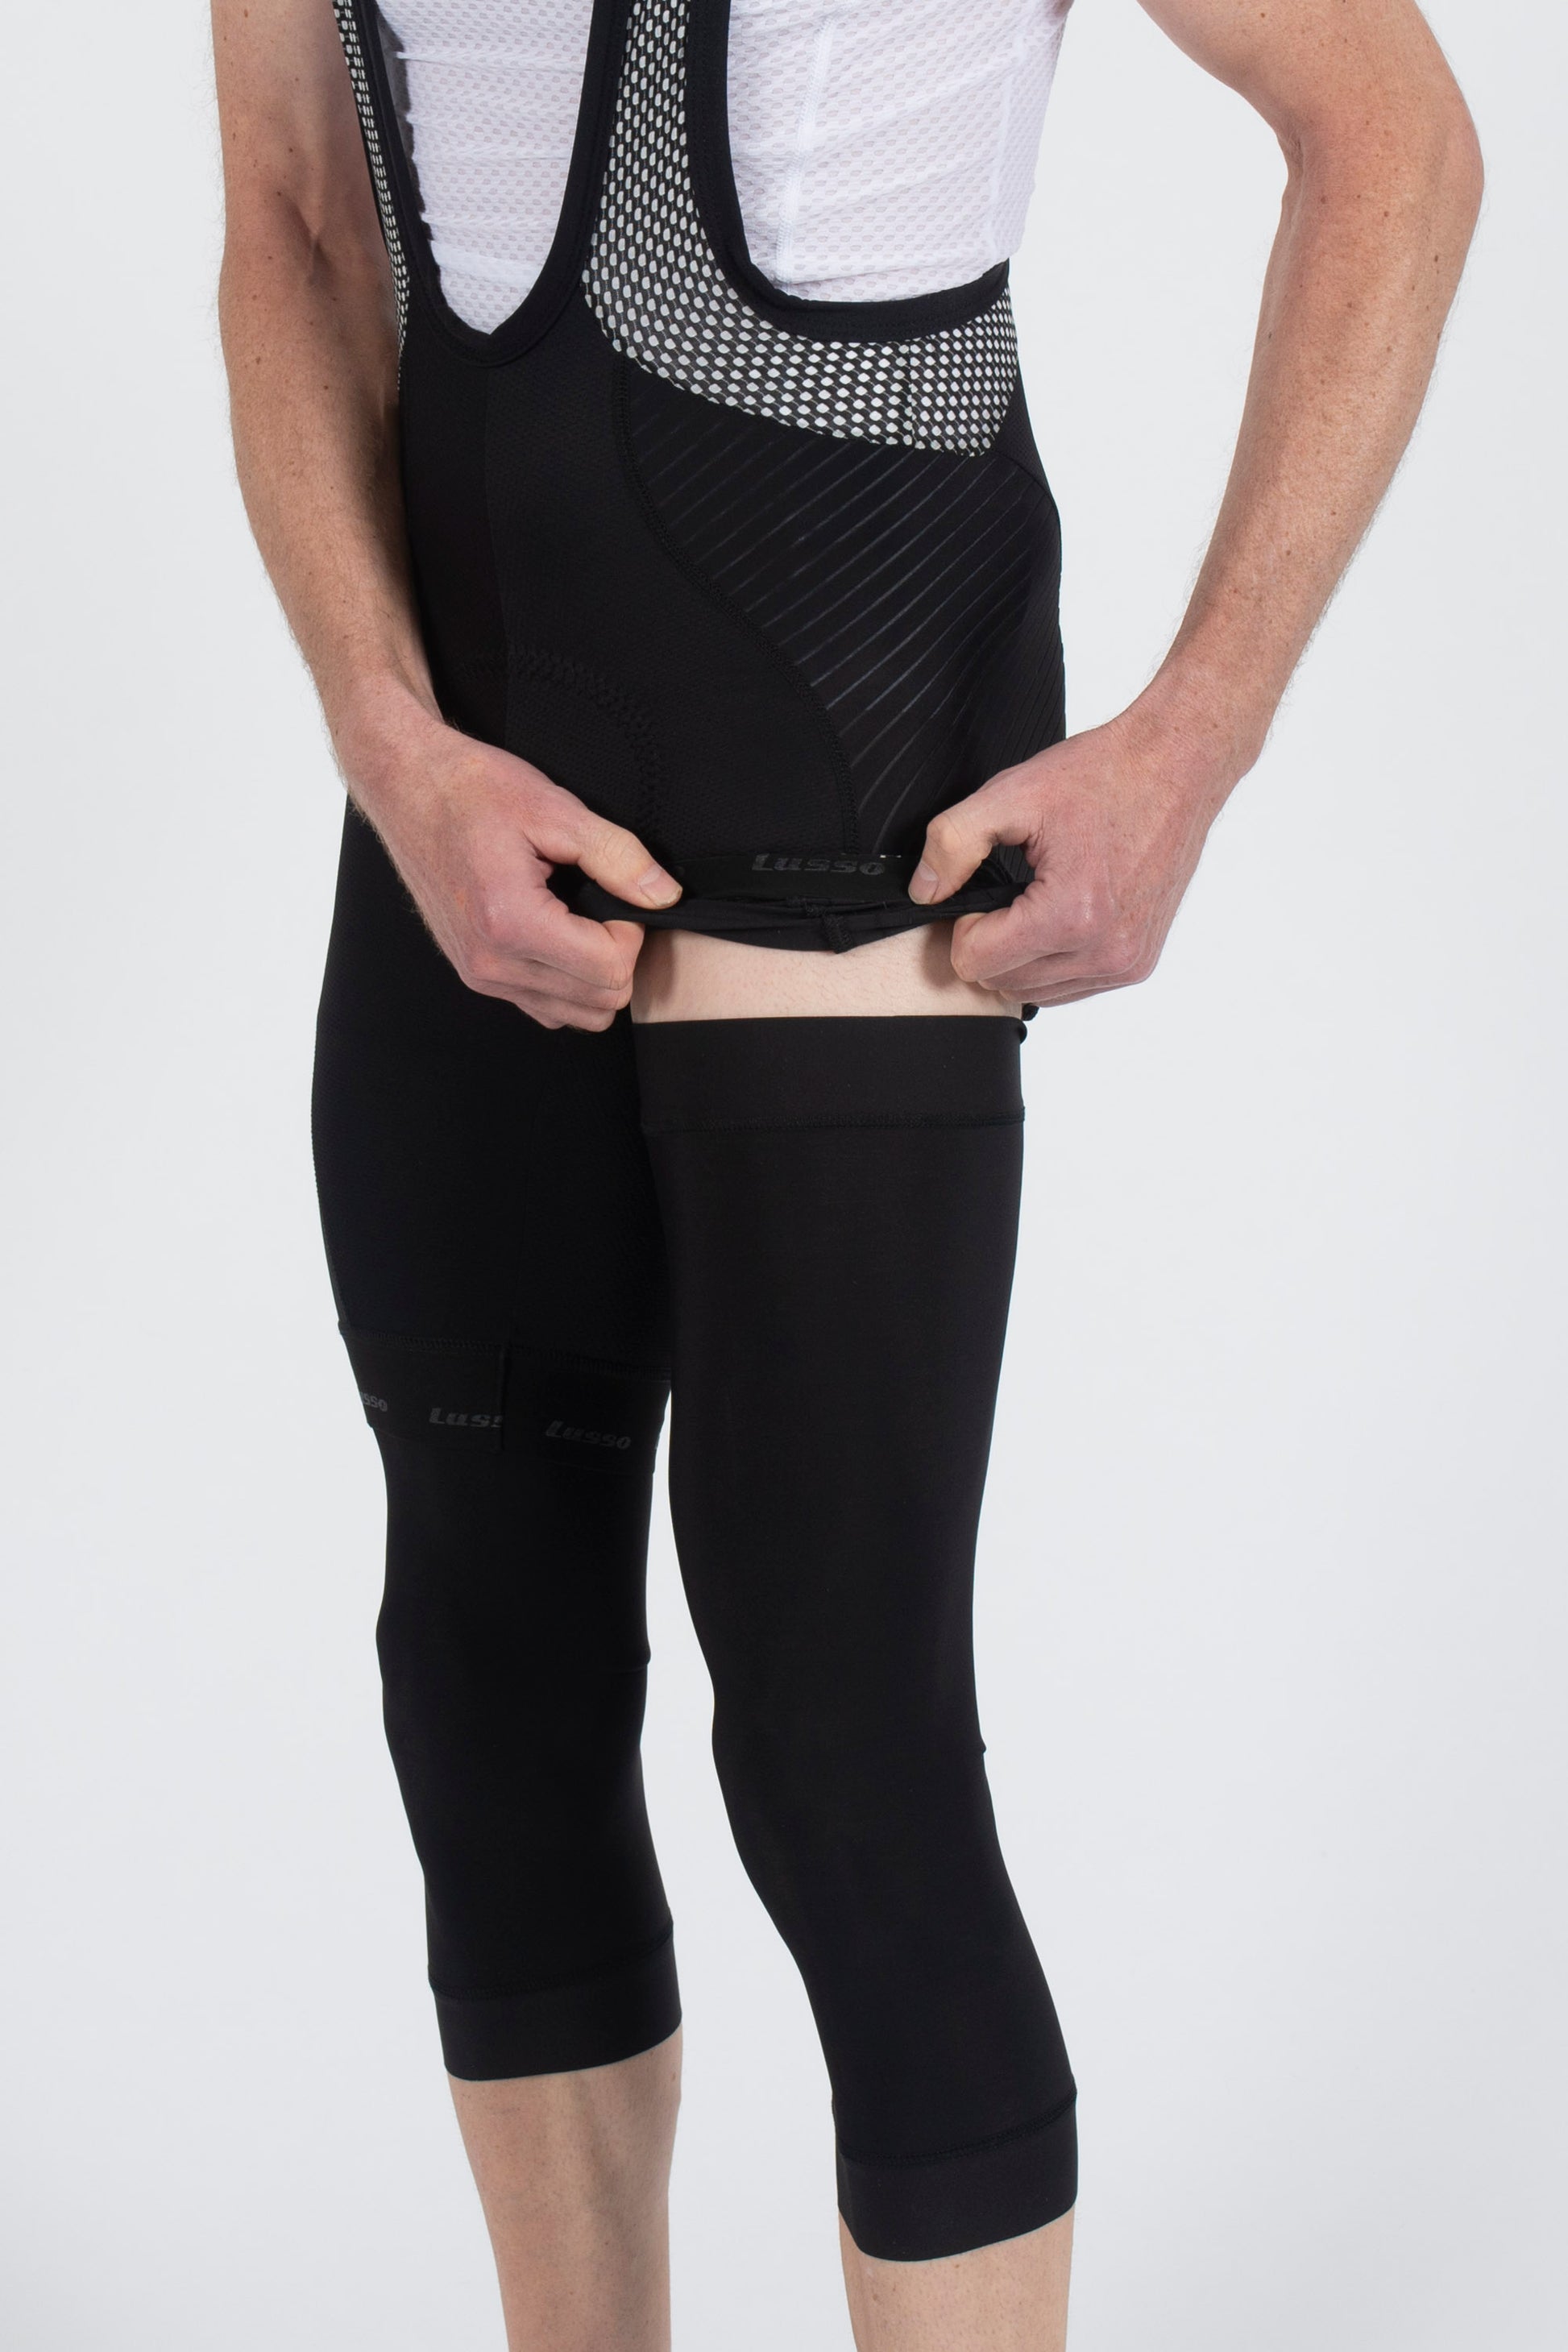 Max Repel Knee Warmers - Lusso Cycle Wear